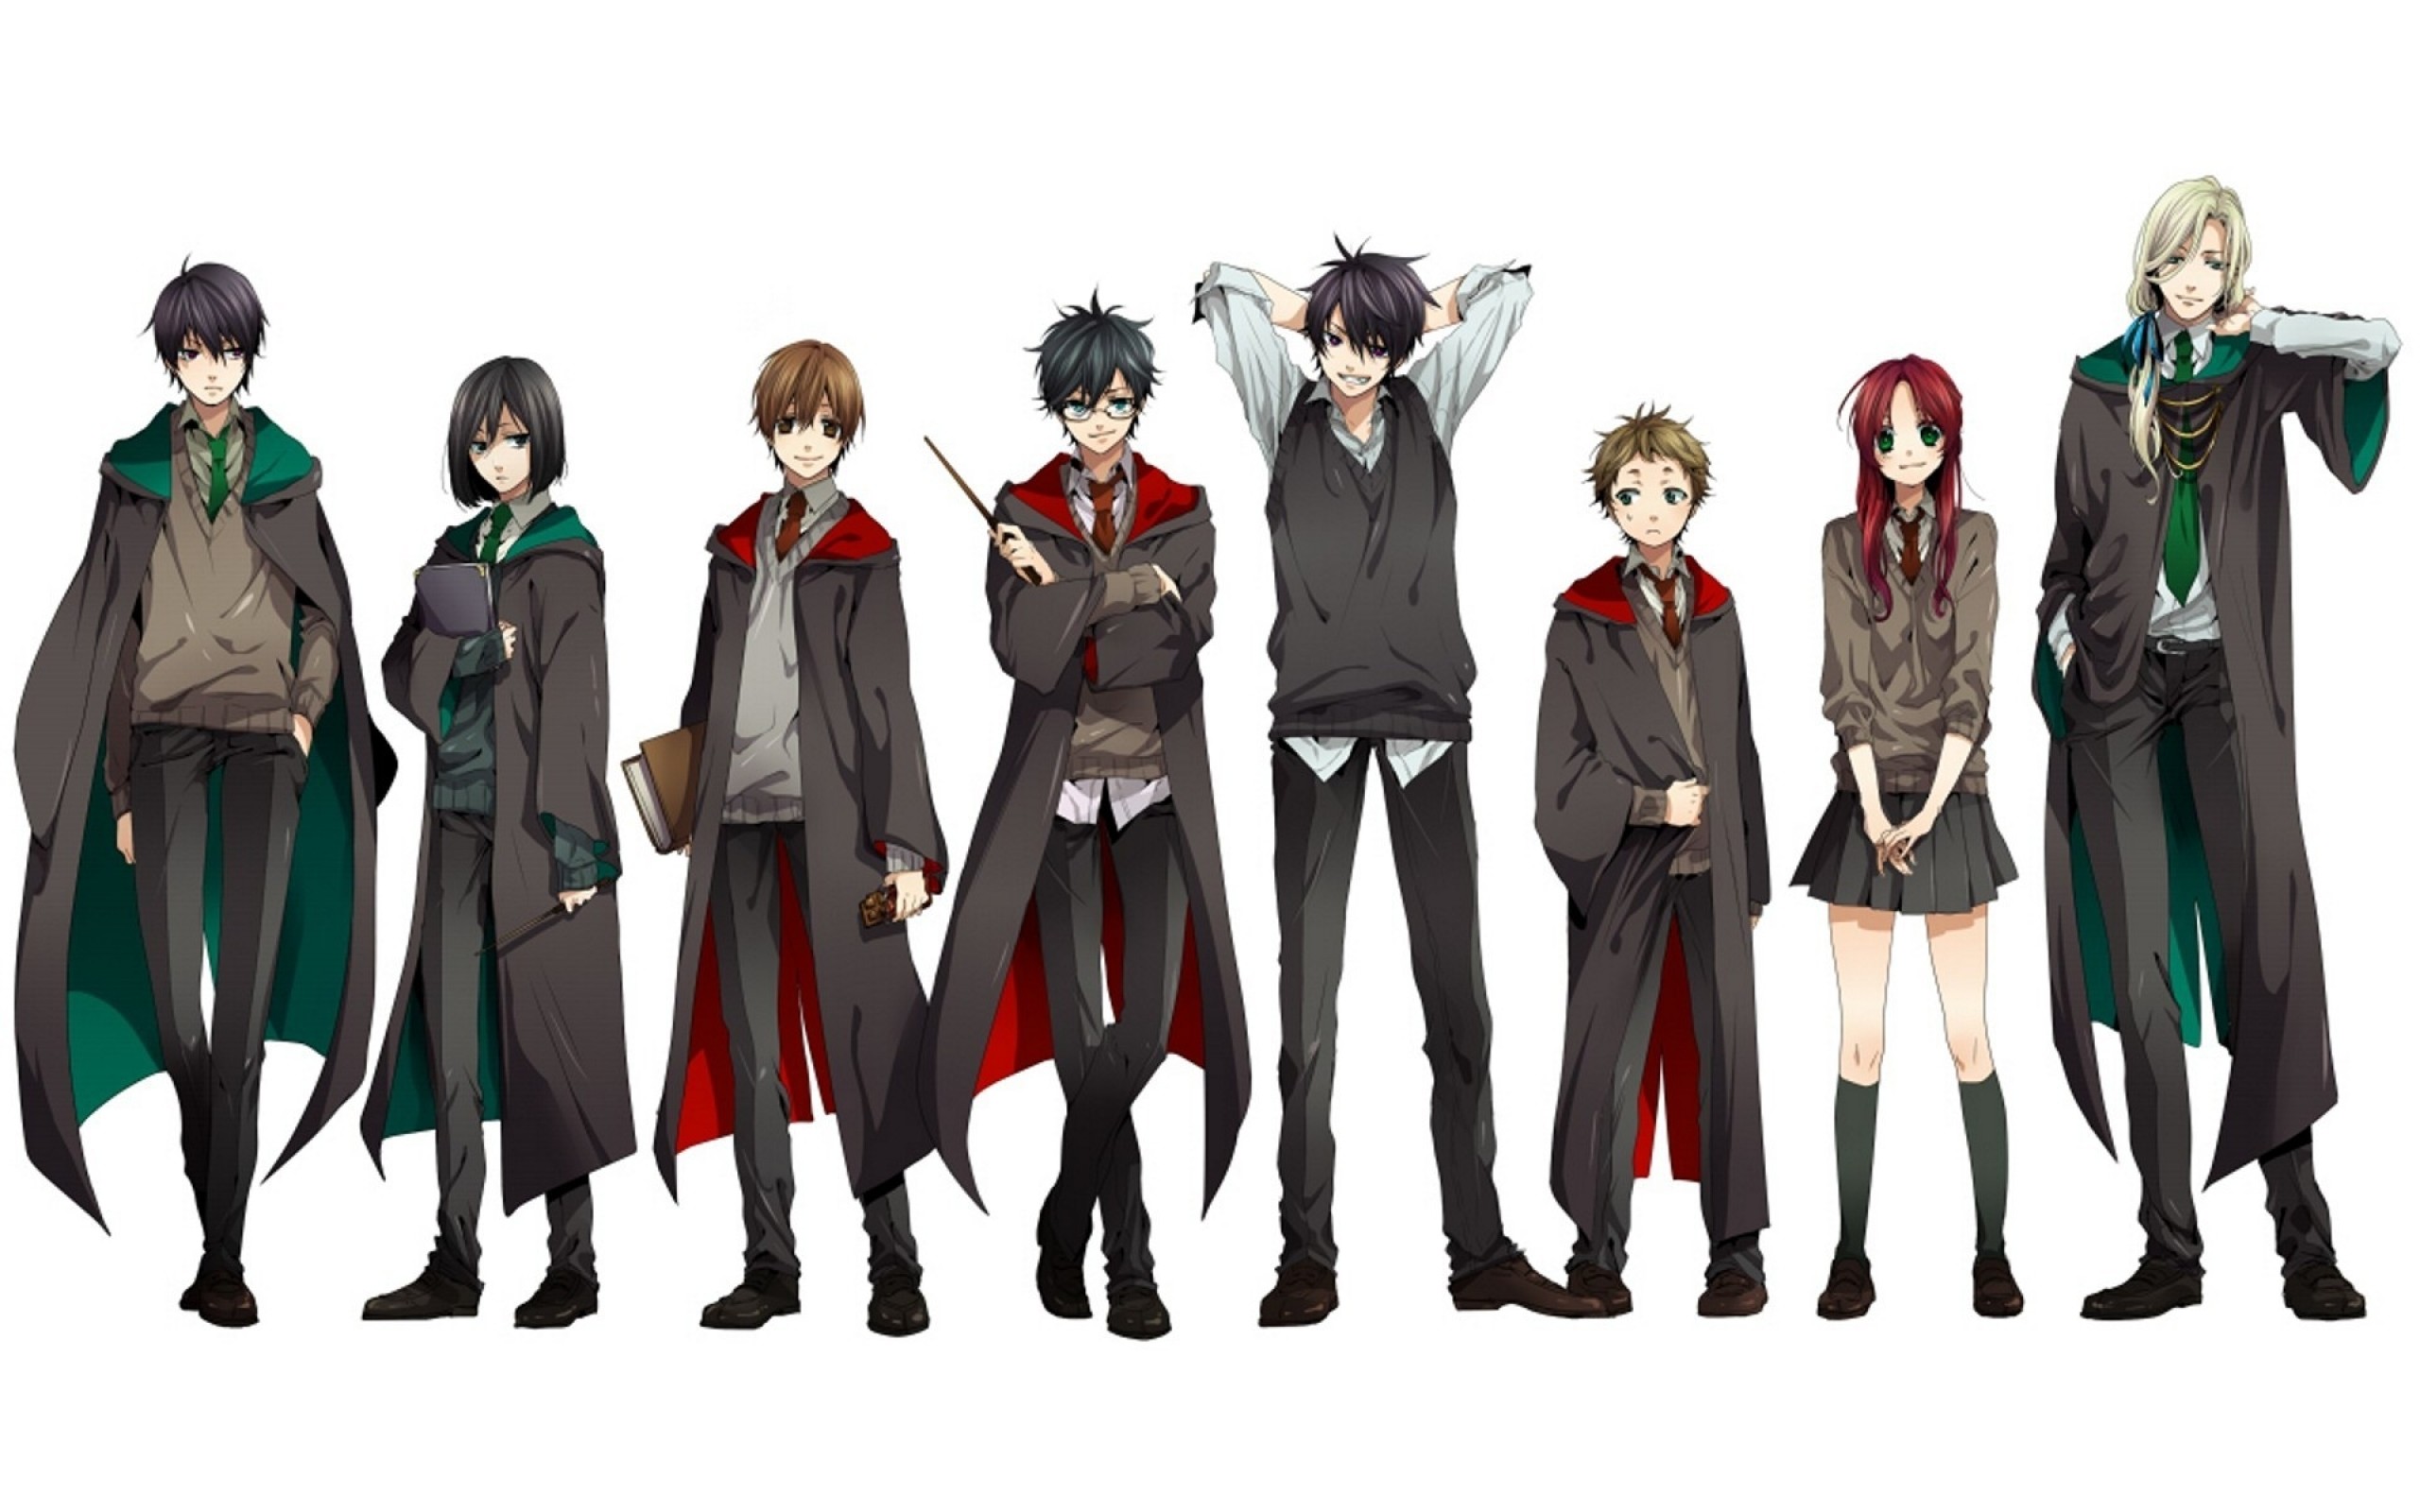 Harry Potter Sirius Black Anime Students Gryffindor - Tom Riddle And James  Potter - 2560x1600 Wallpaper 